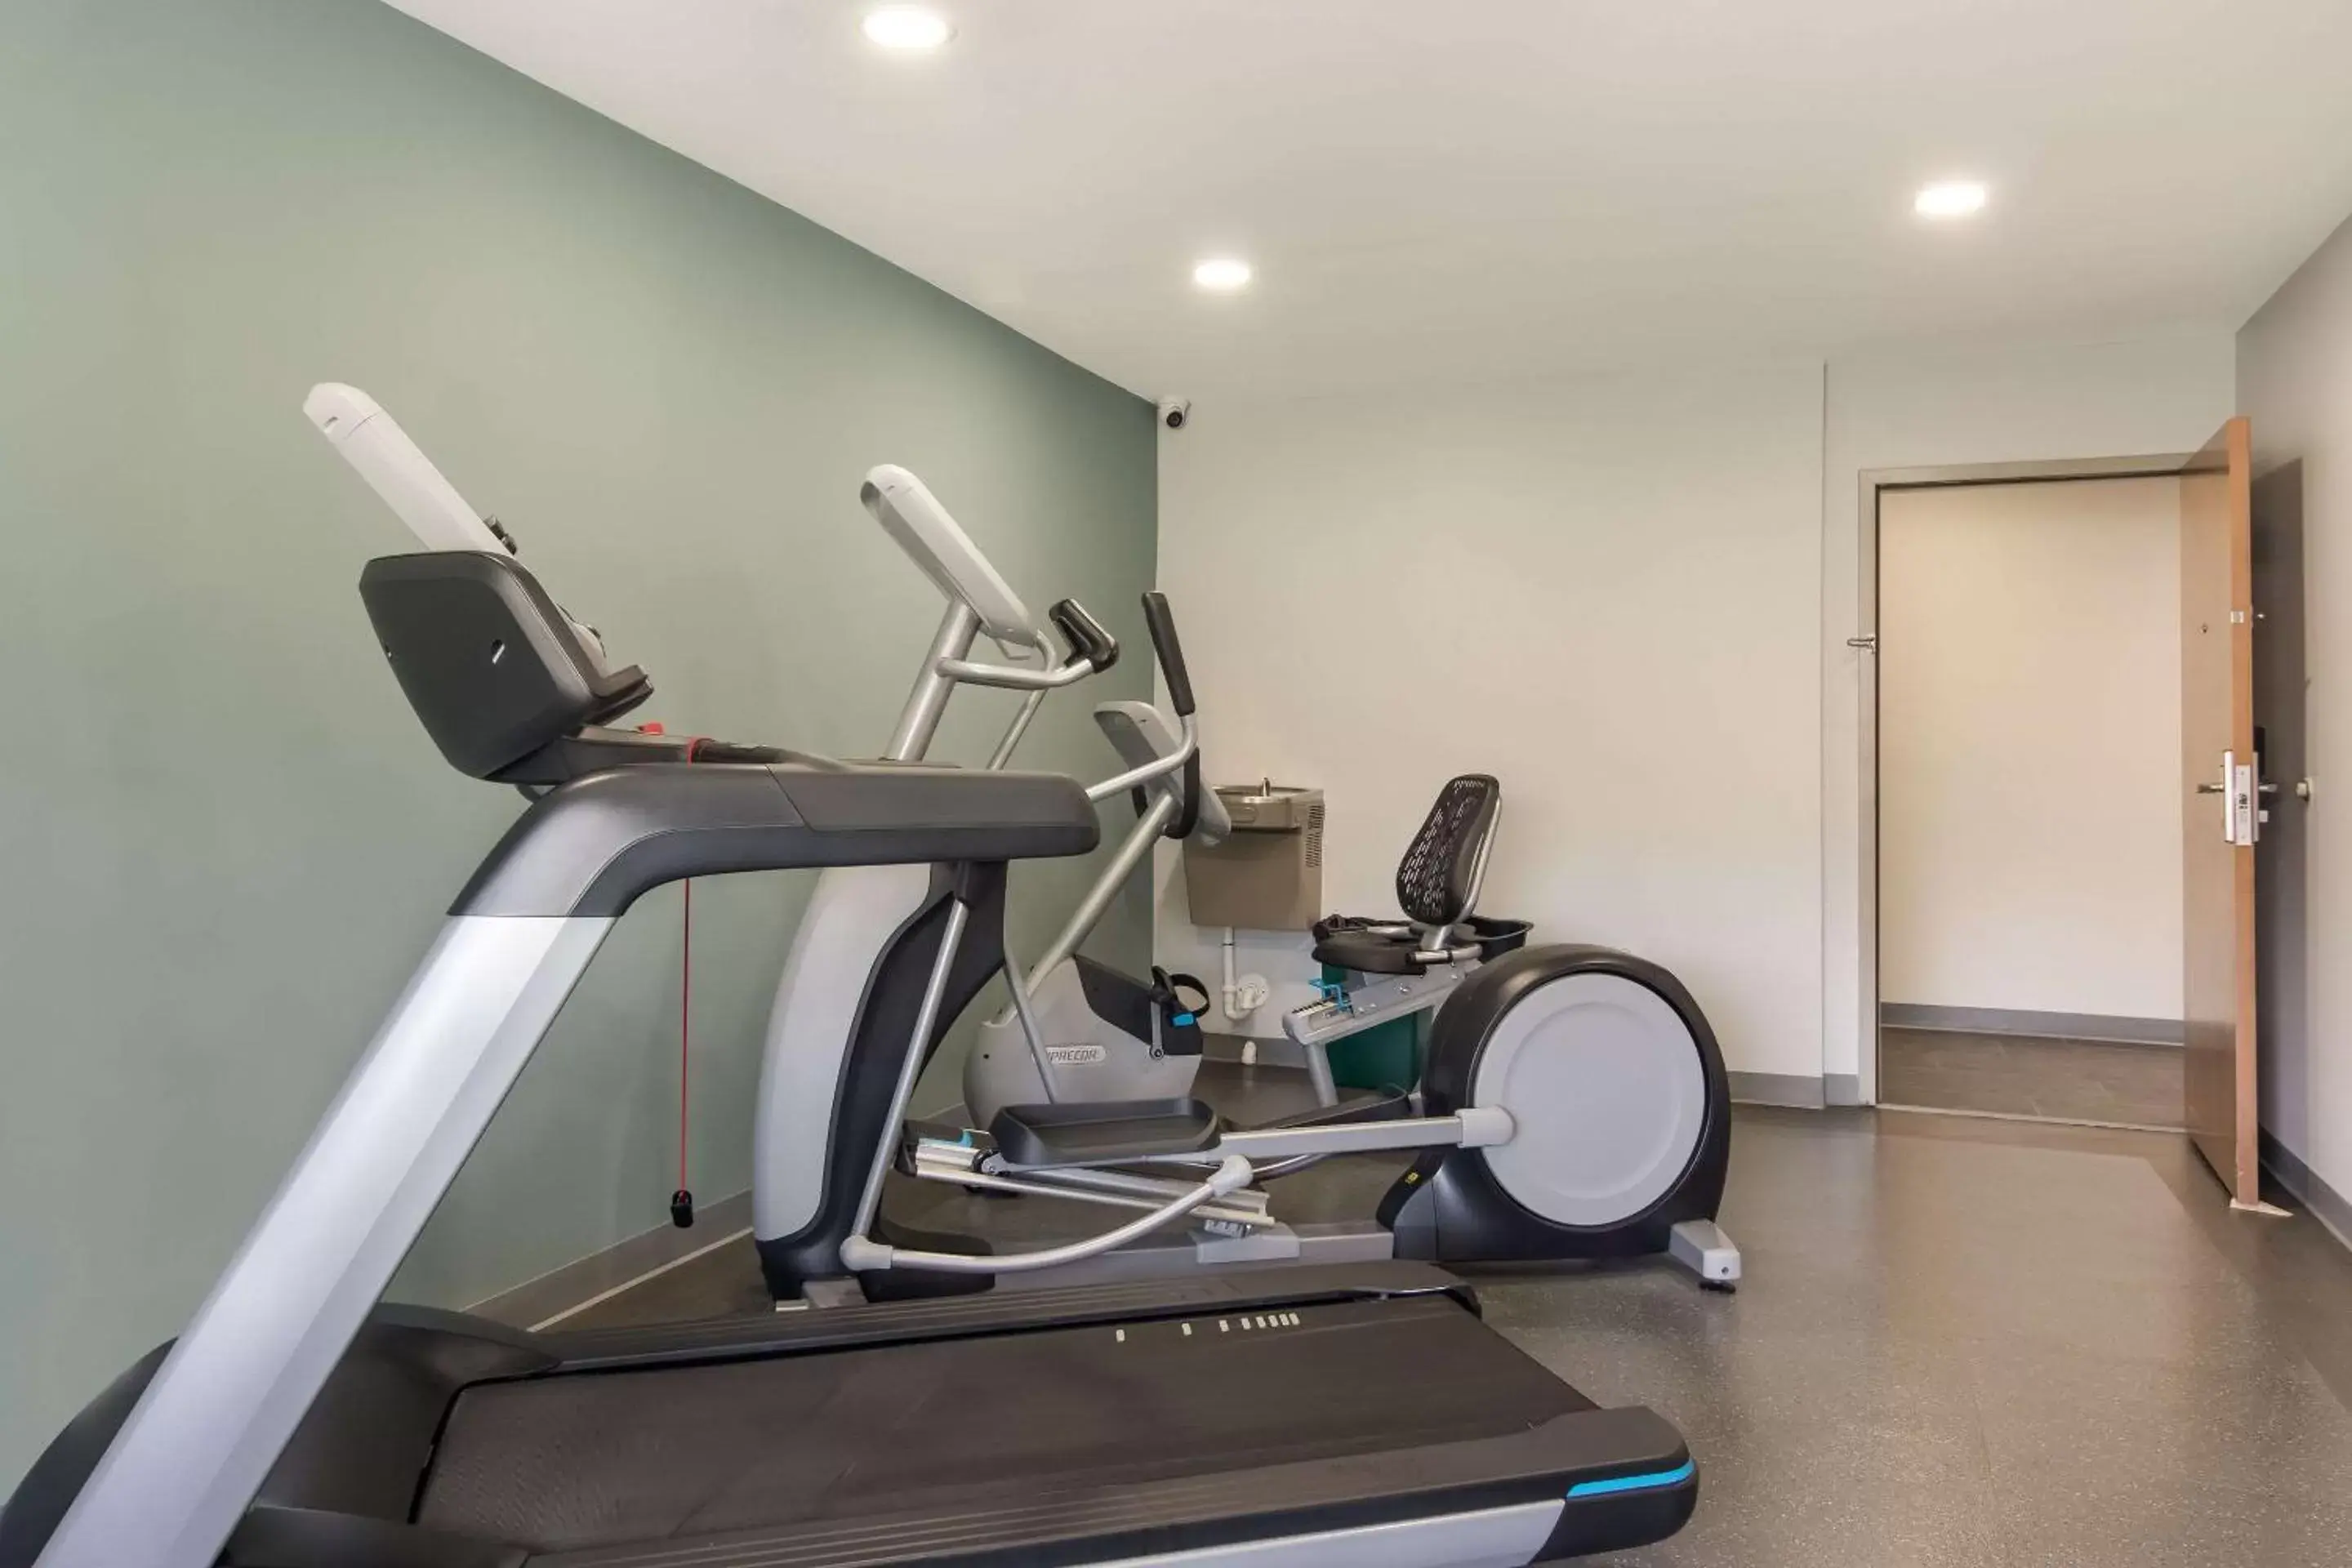 Fitness centre/facilities, Fitness Center/Facilities in Sleep Inn & Suites Clarion, PA near I-80